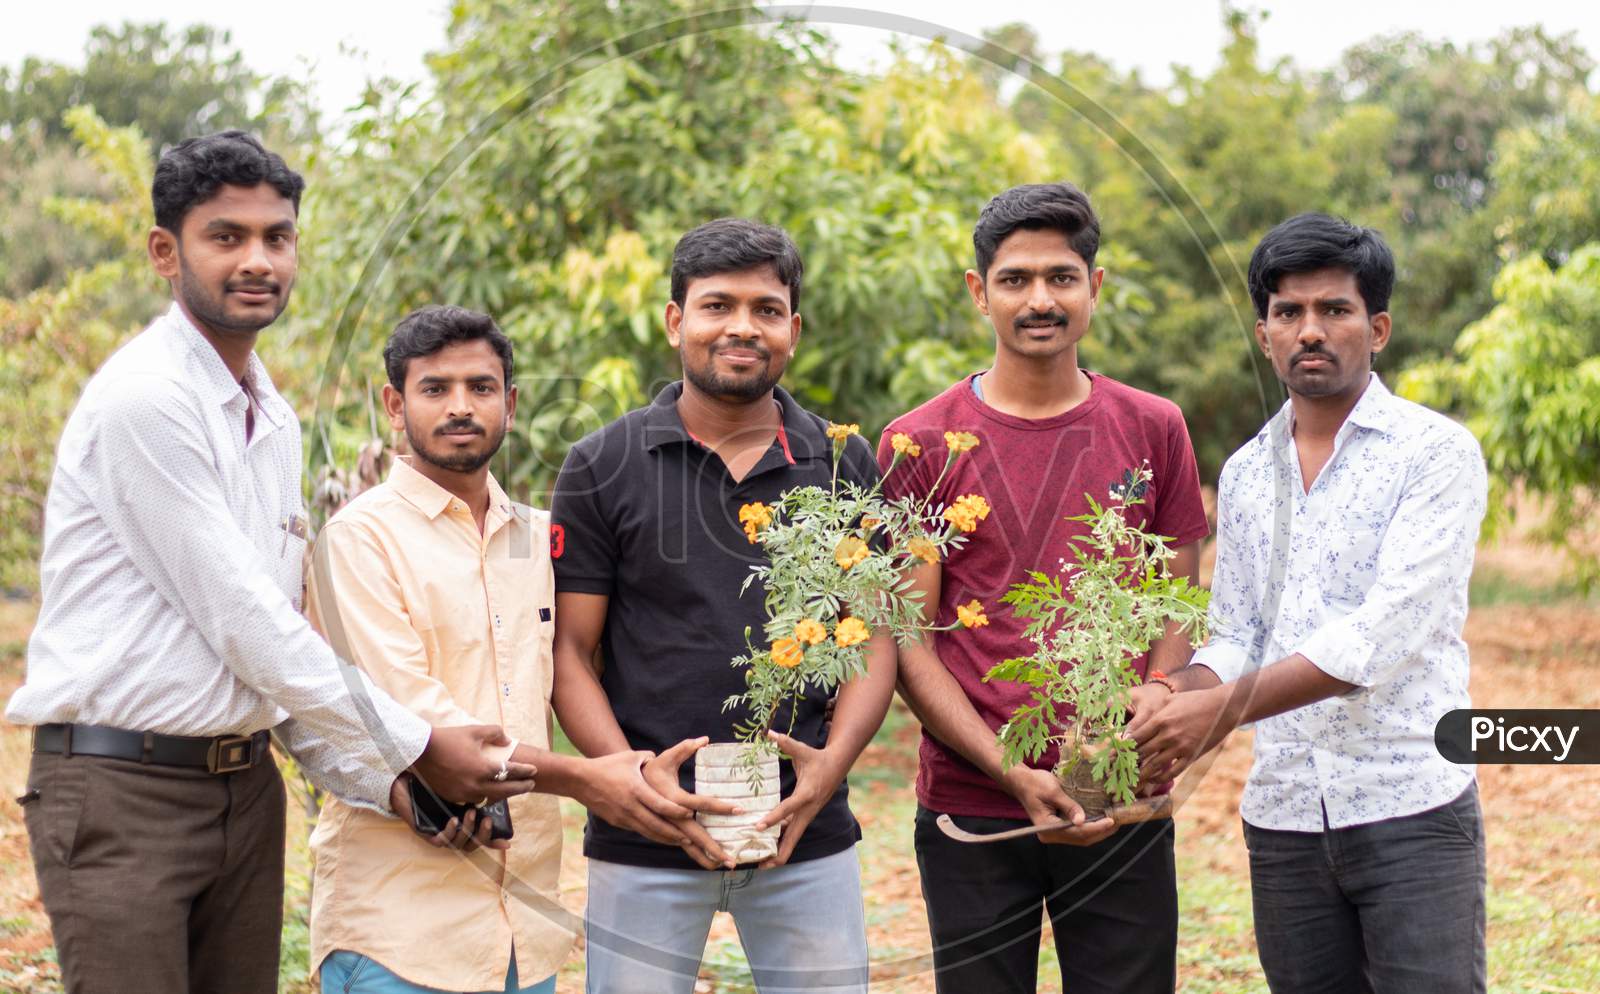 Group of Young People Posing towards the Camera with Plants in Hands